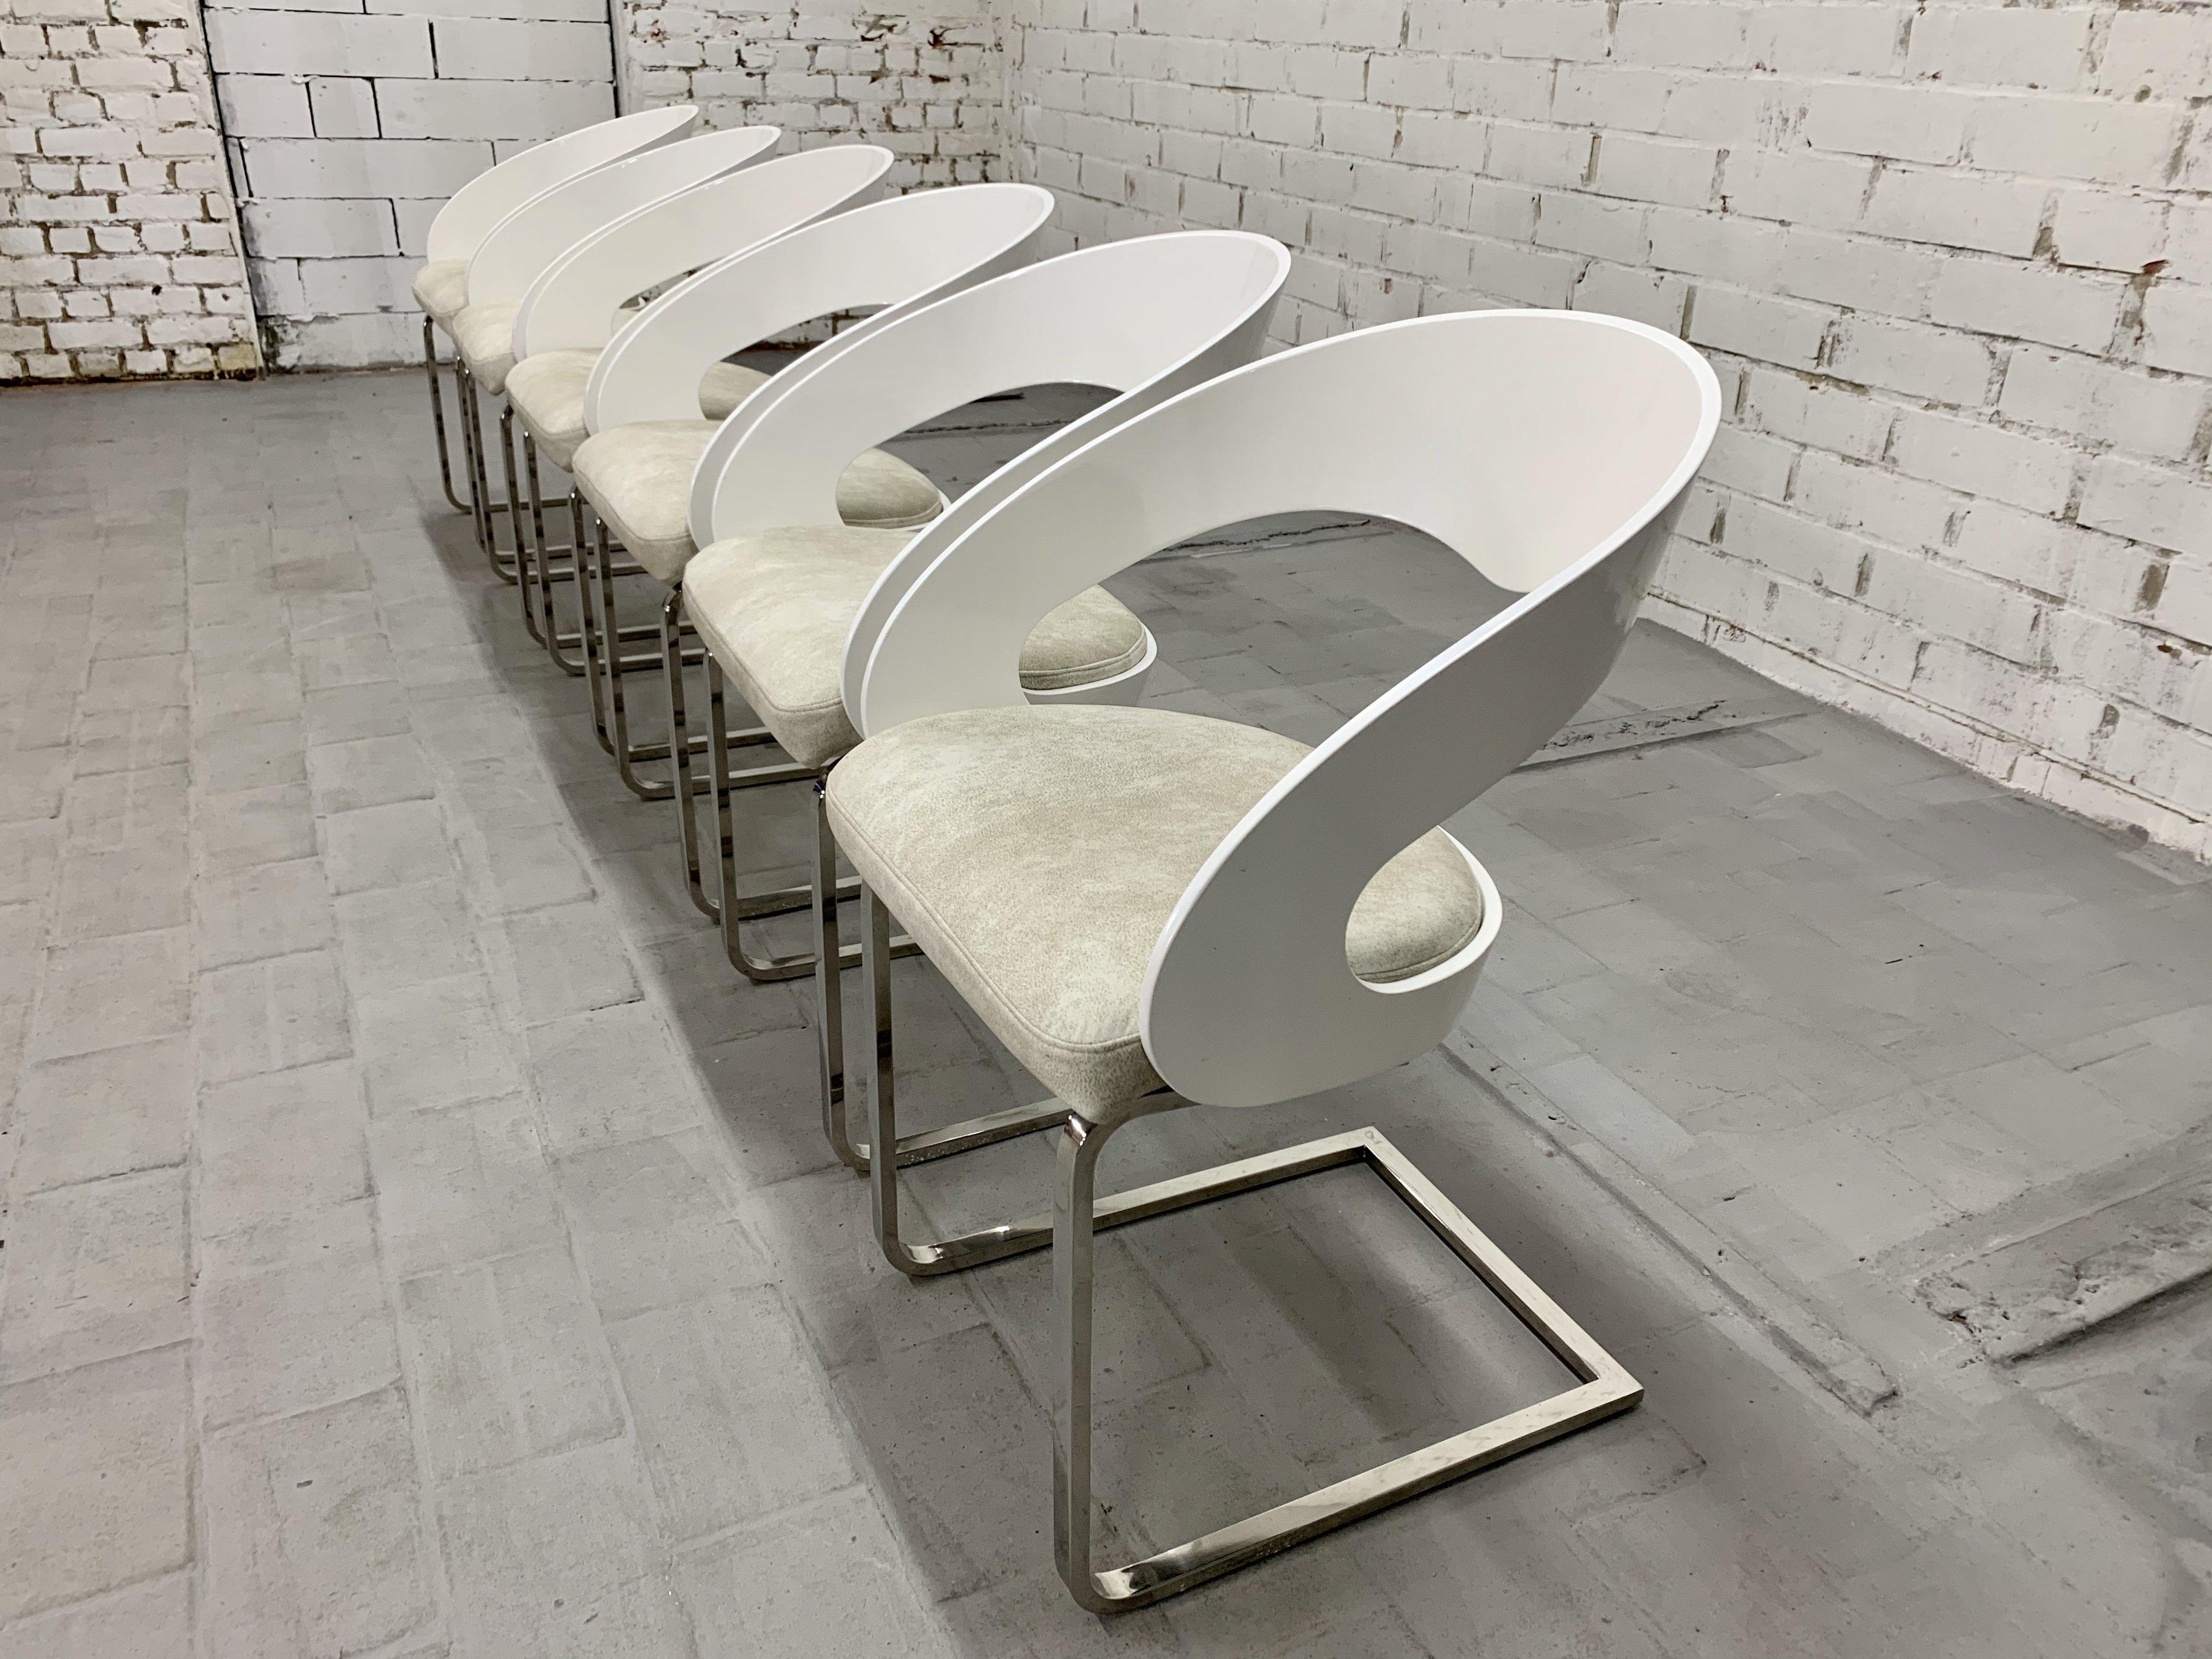 Eero Saarinen Styled Contemporary Dining Chairs - Set of 6 In Good Condition For Sale In Bridgeport, CT